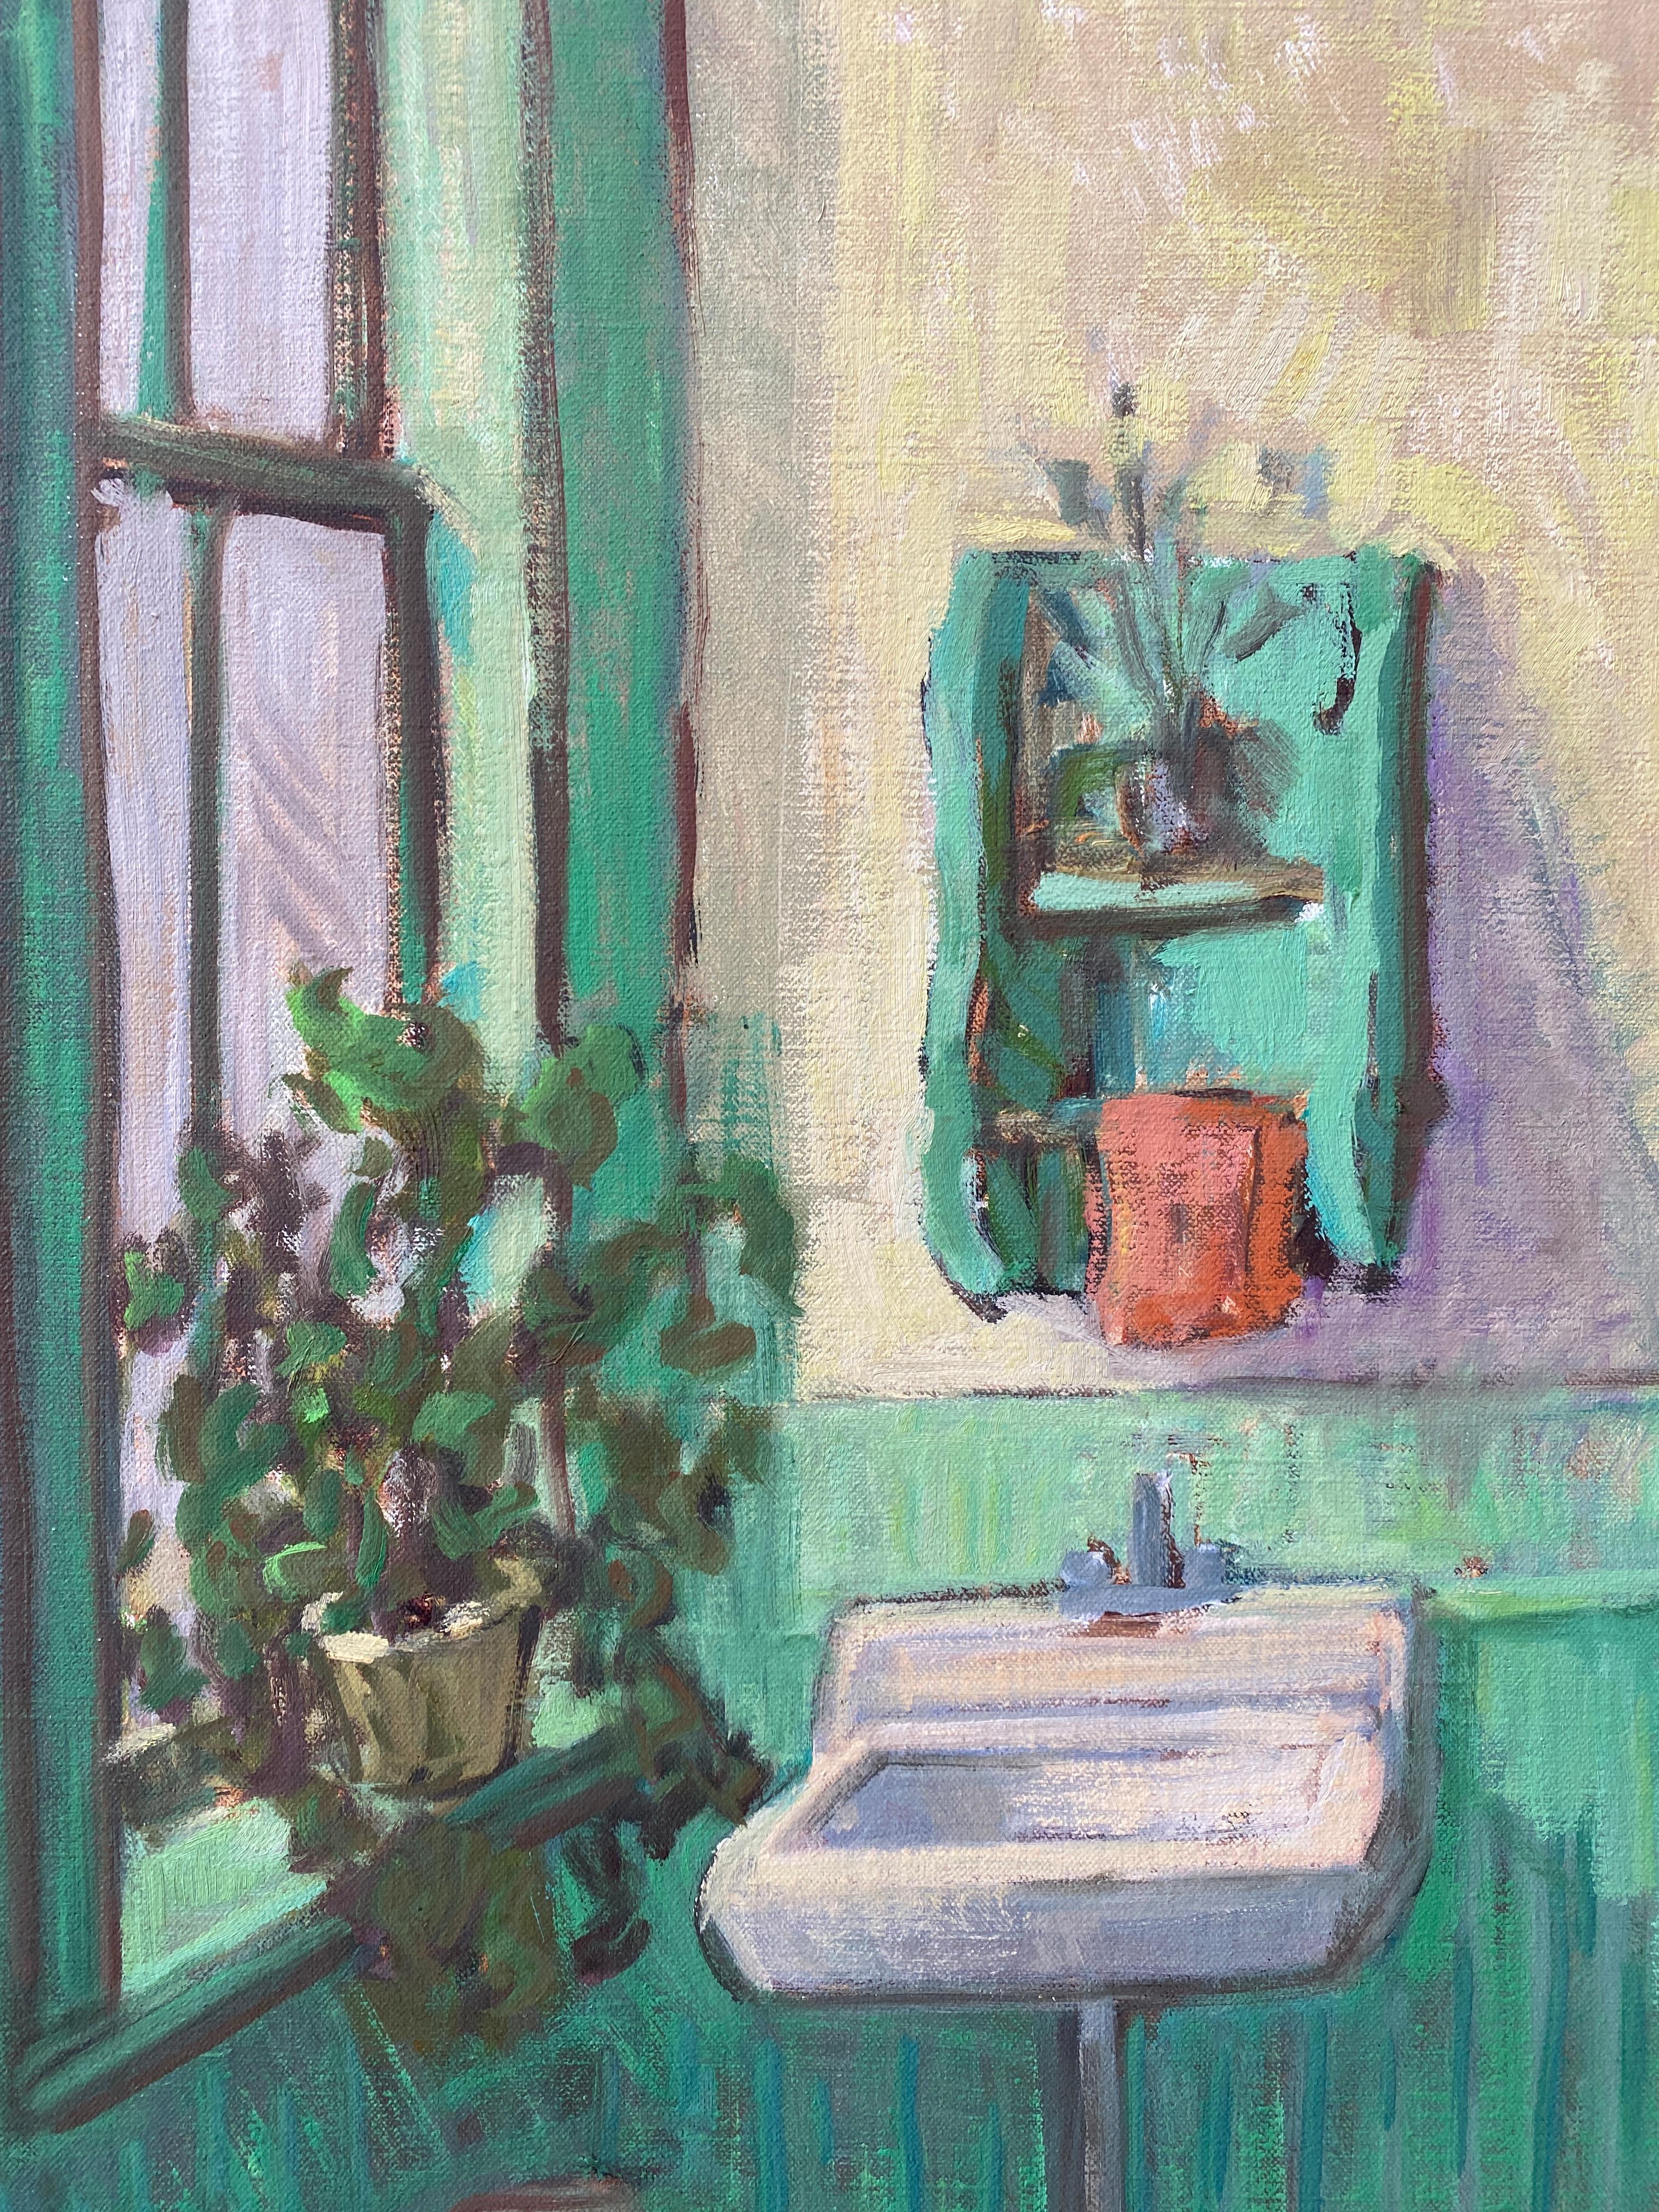 Hallway in Green - Gray Still-Life Painting by Tim McGuire